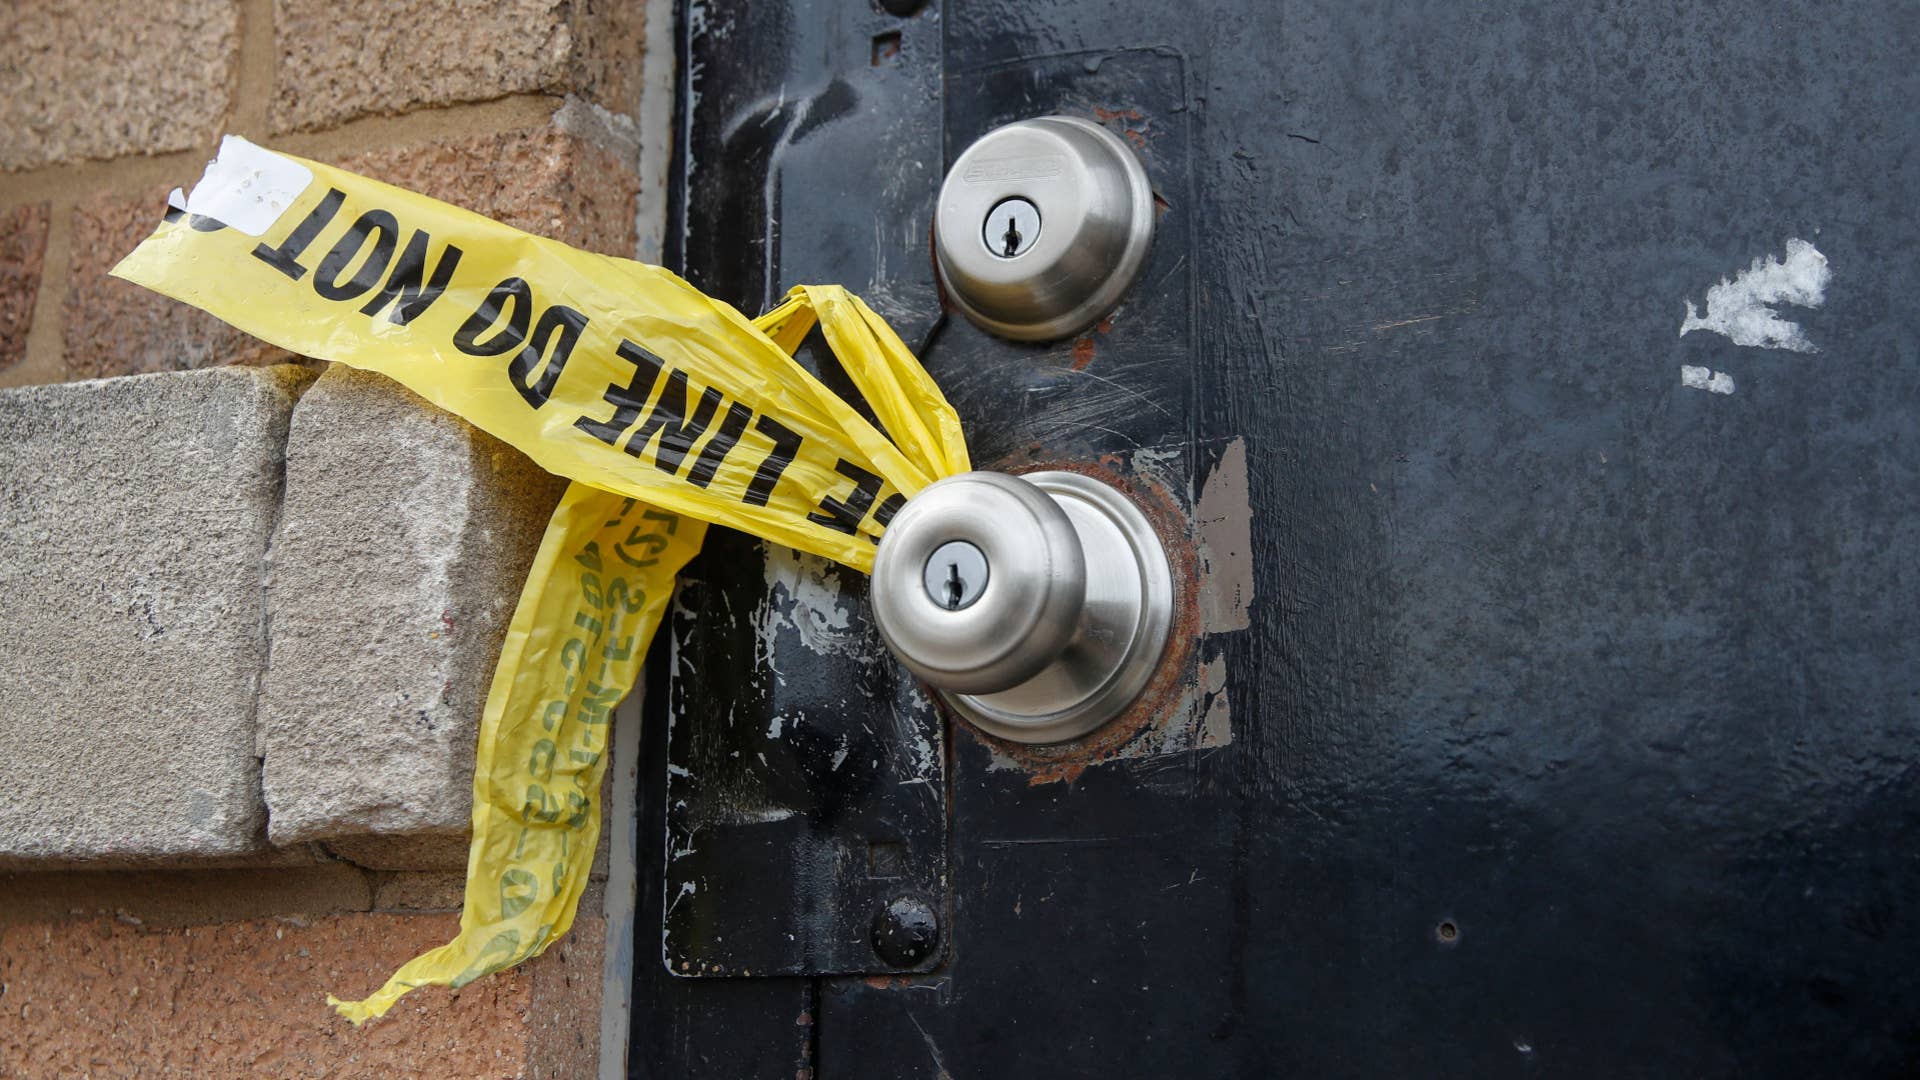 A piece of police caution tape is seen on the front door of the building where a shooting took place in Chicago.